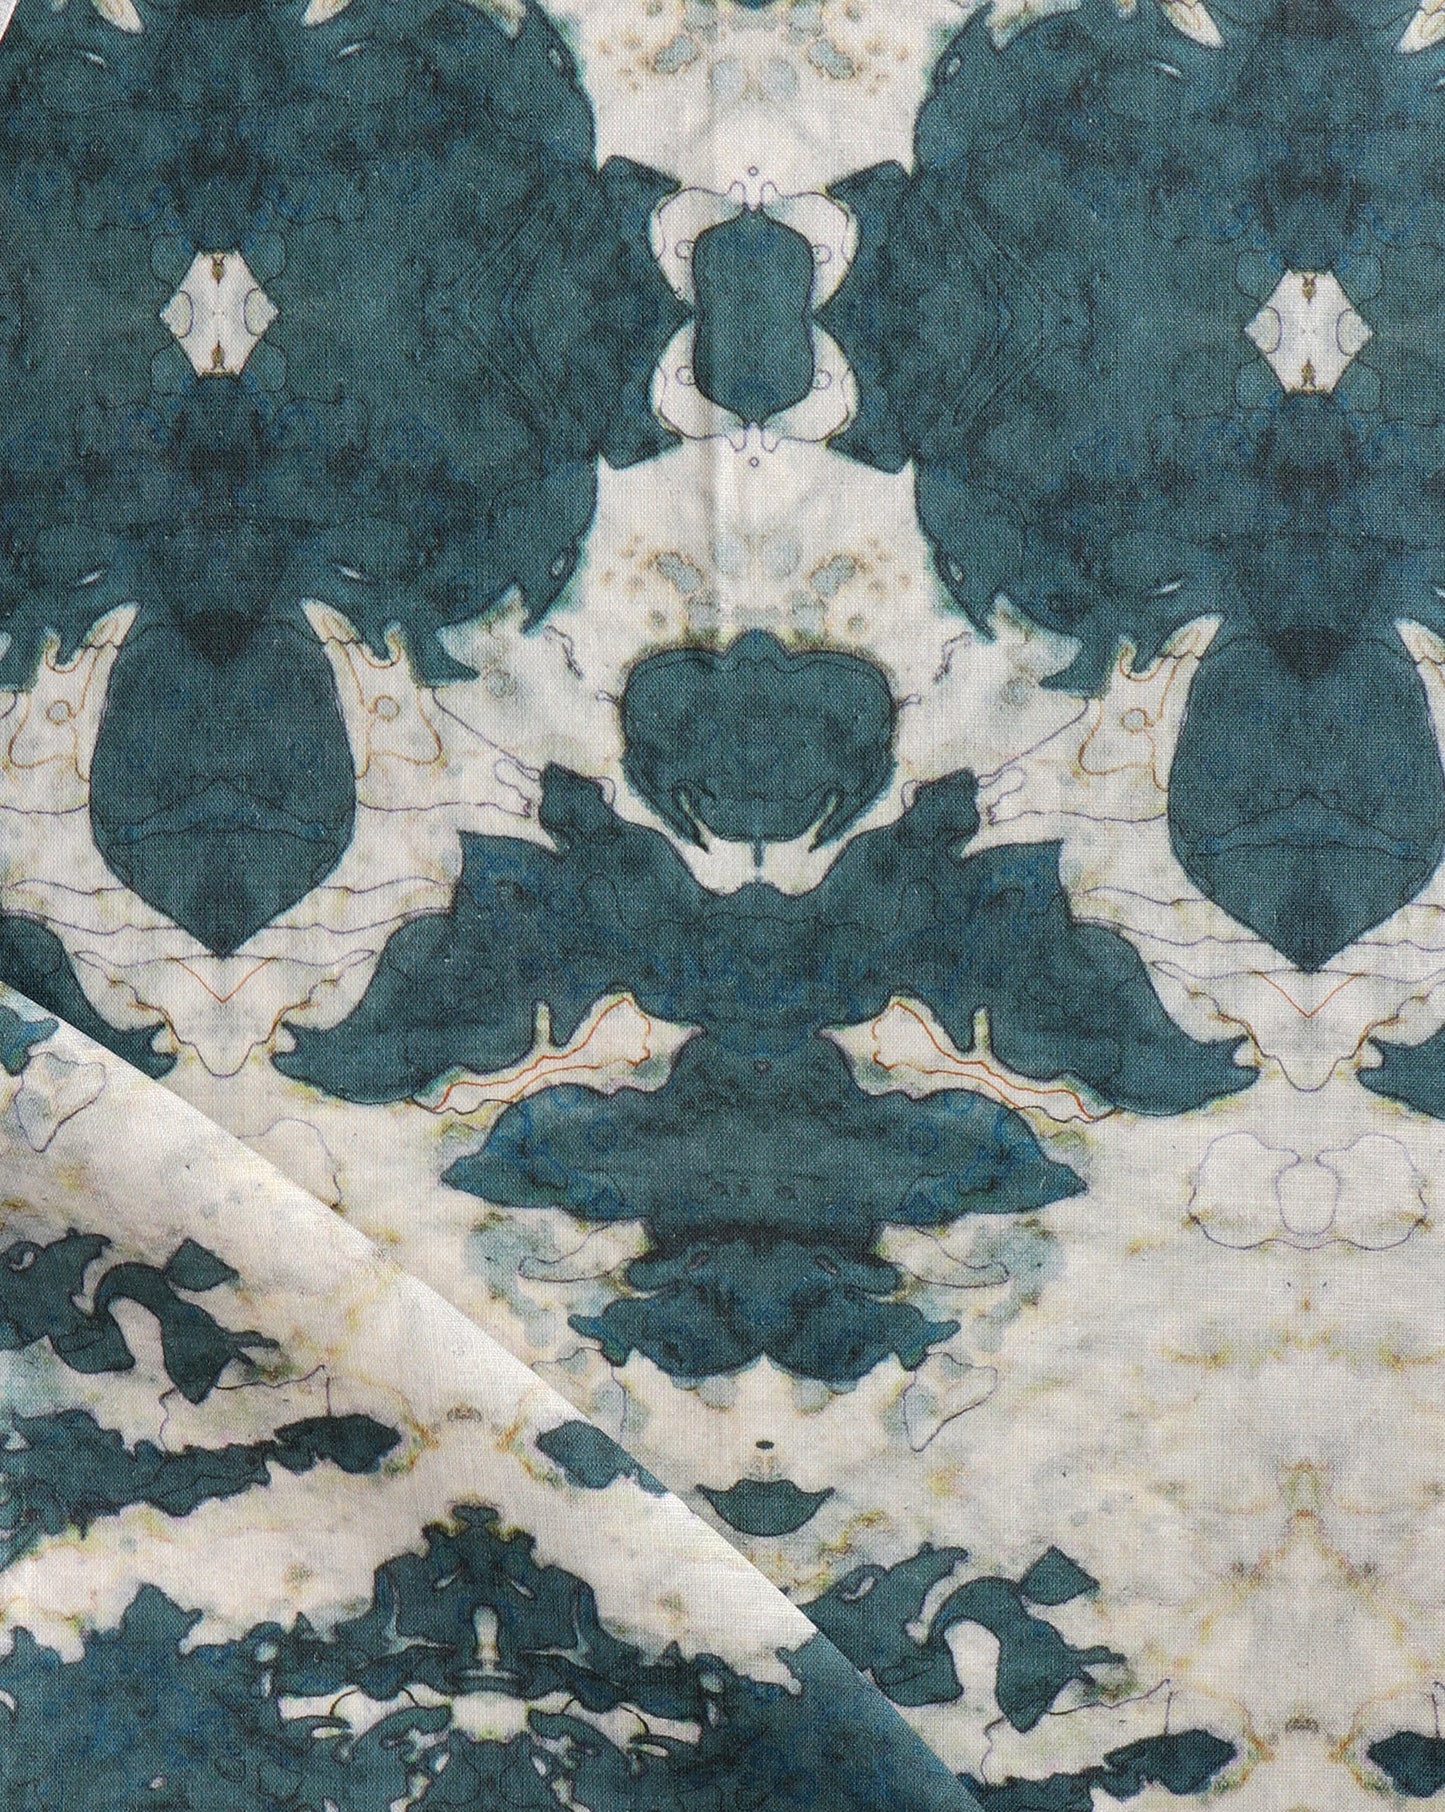 A blue and white fabric from The Dance Performance Fabric Olive with a floral pattern